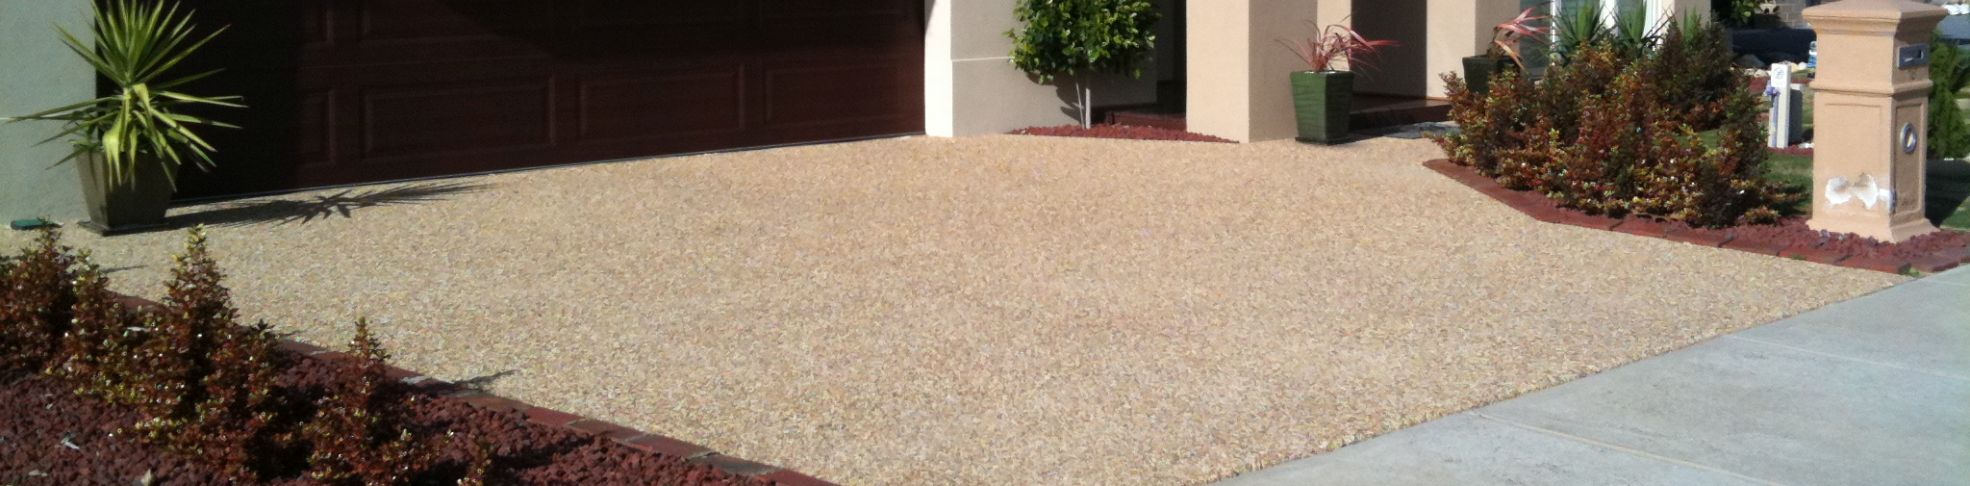 Experts in Decorative Concrete for Home Owners and renovators.<br />
<br />